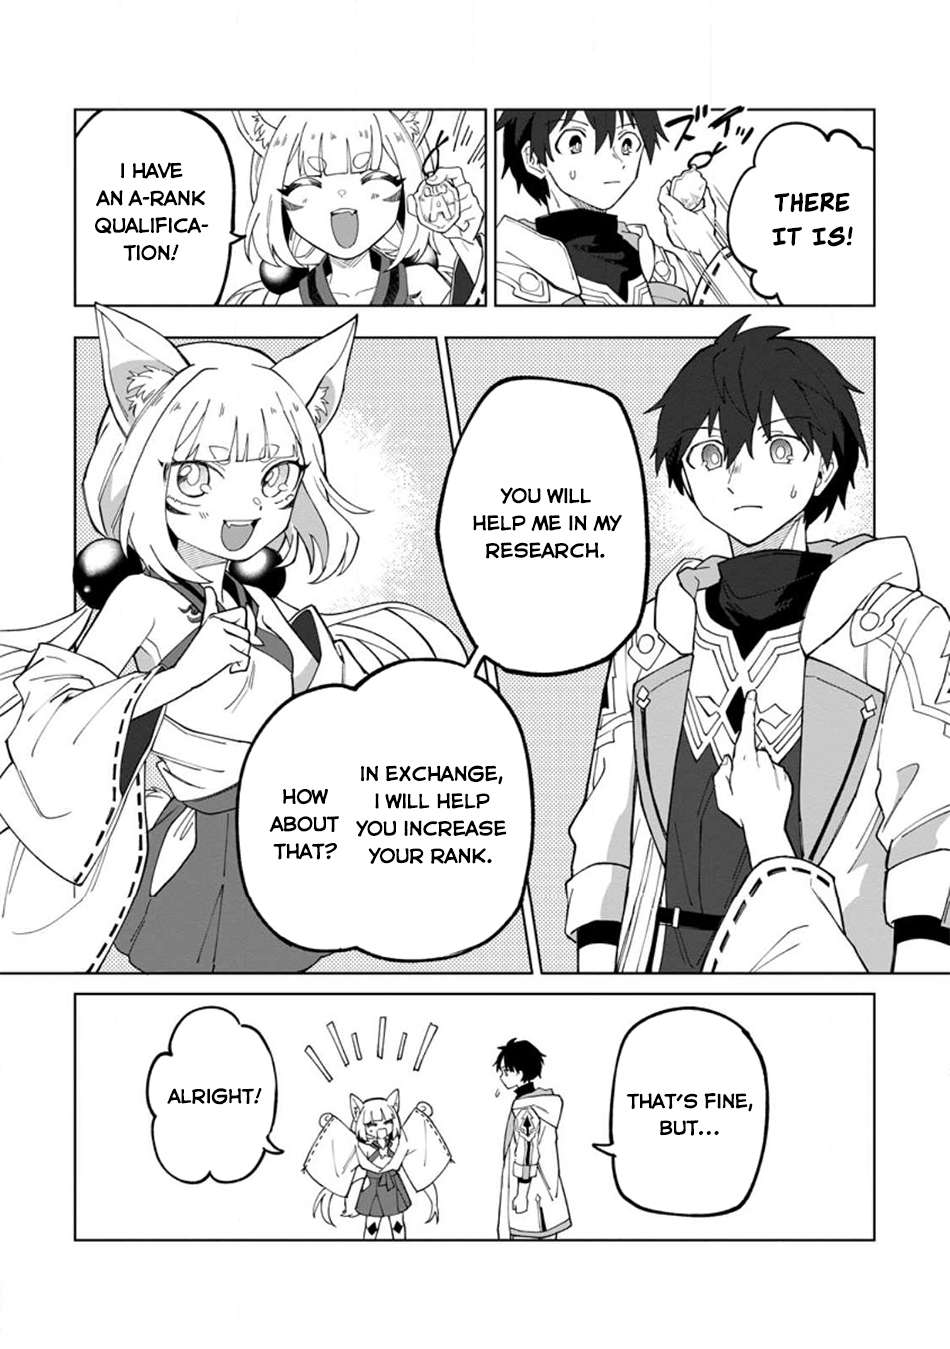 The White Mage Who Was Banished From the Hero's Party - chapter 20.3 - #3